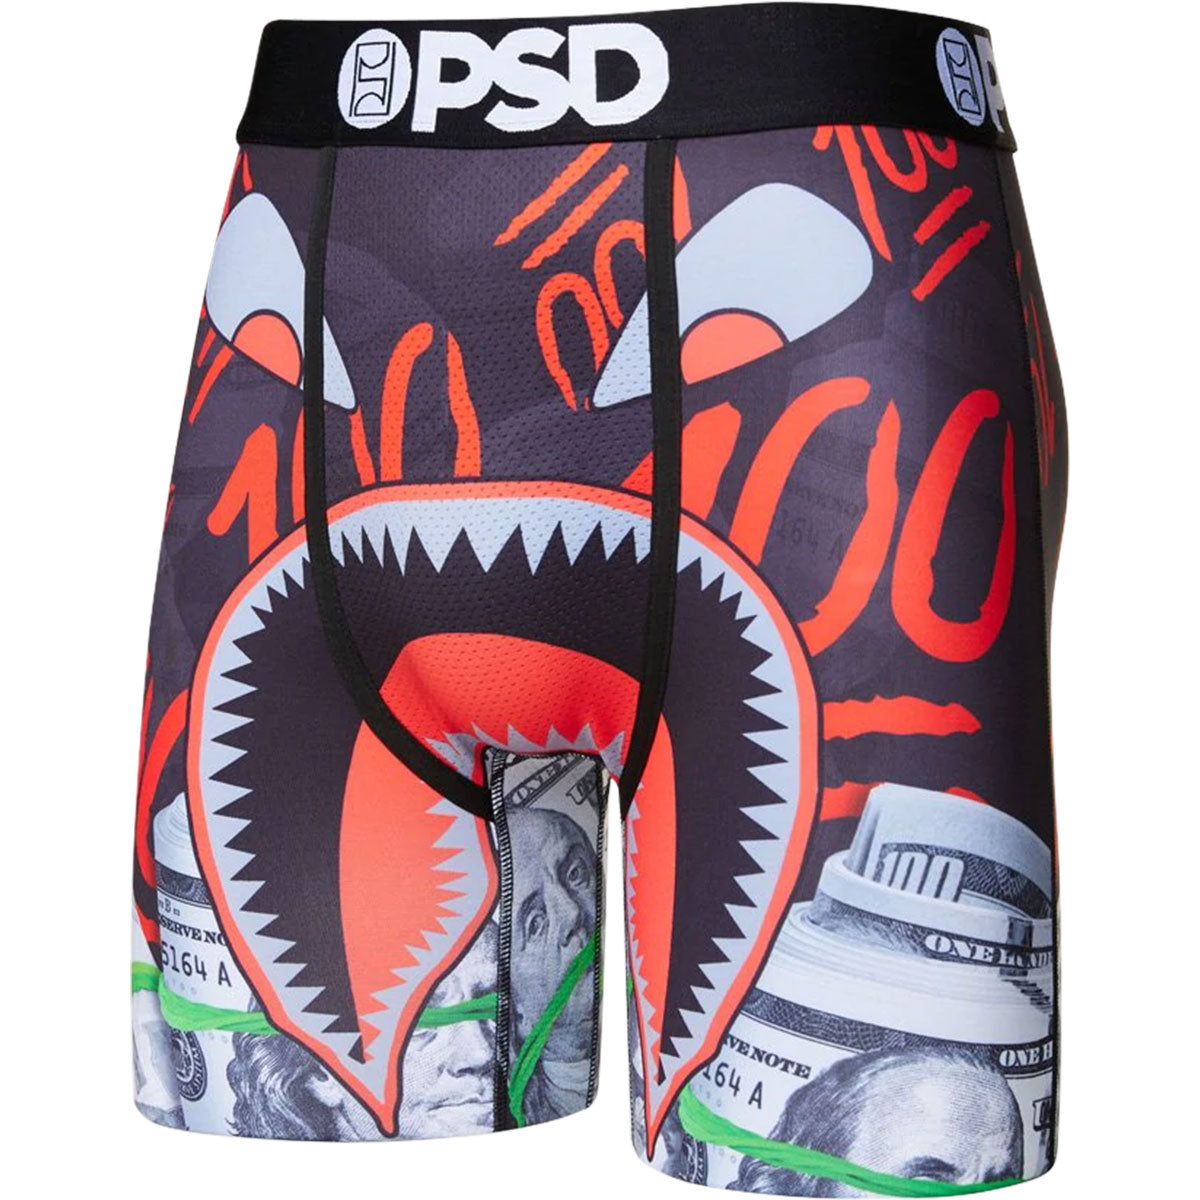 PSD Underwear [Our Comprehensive Guide]